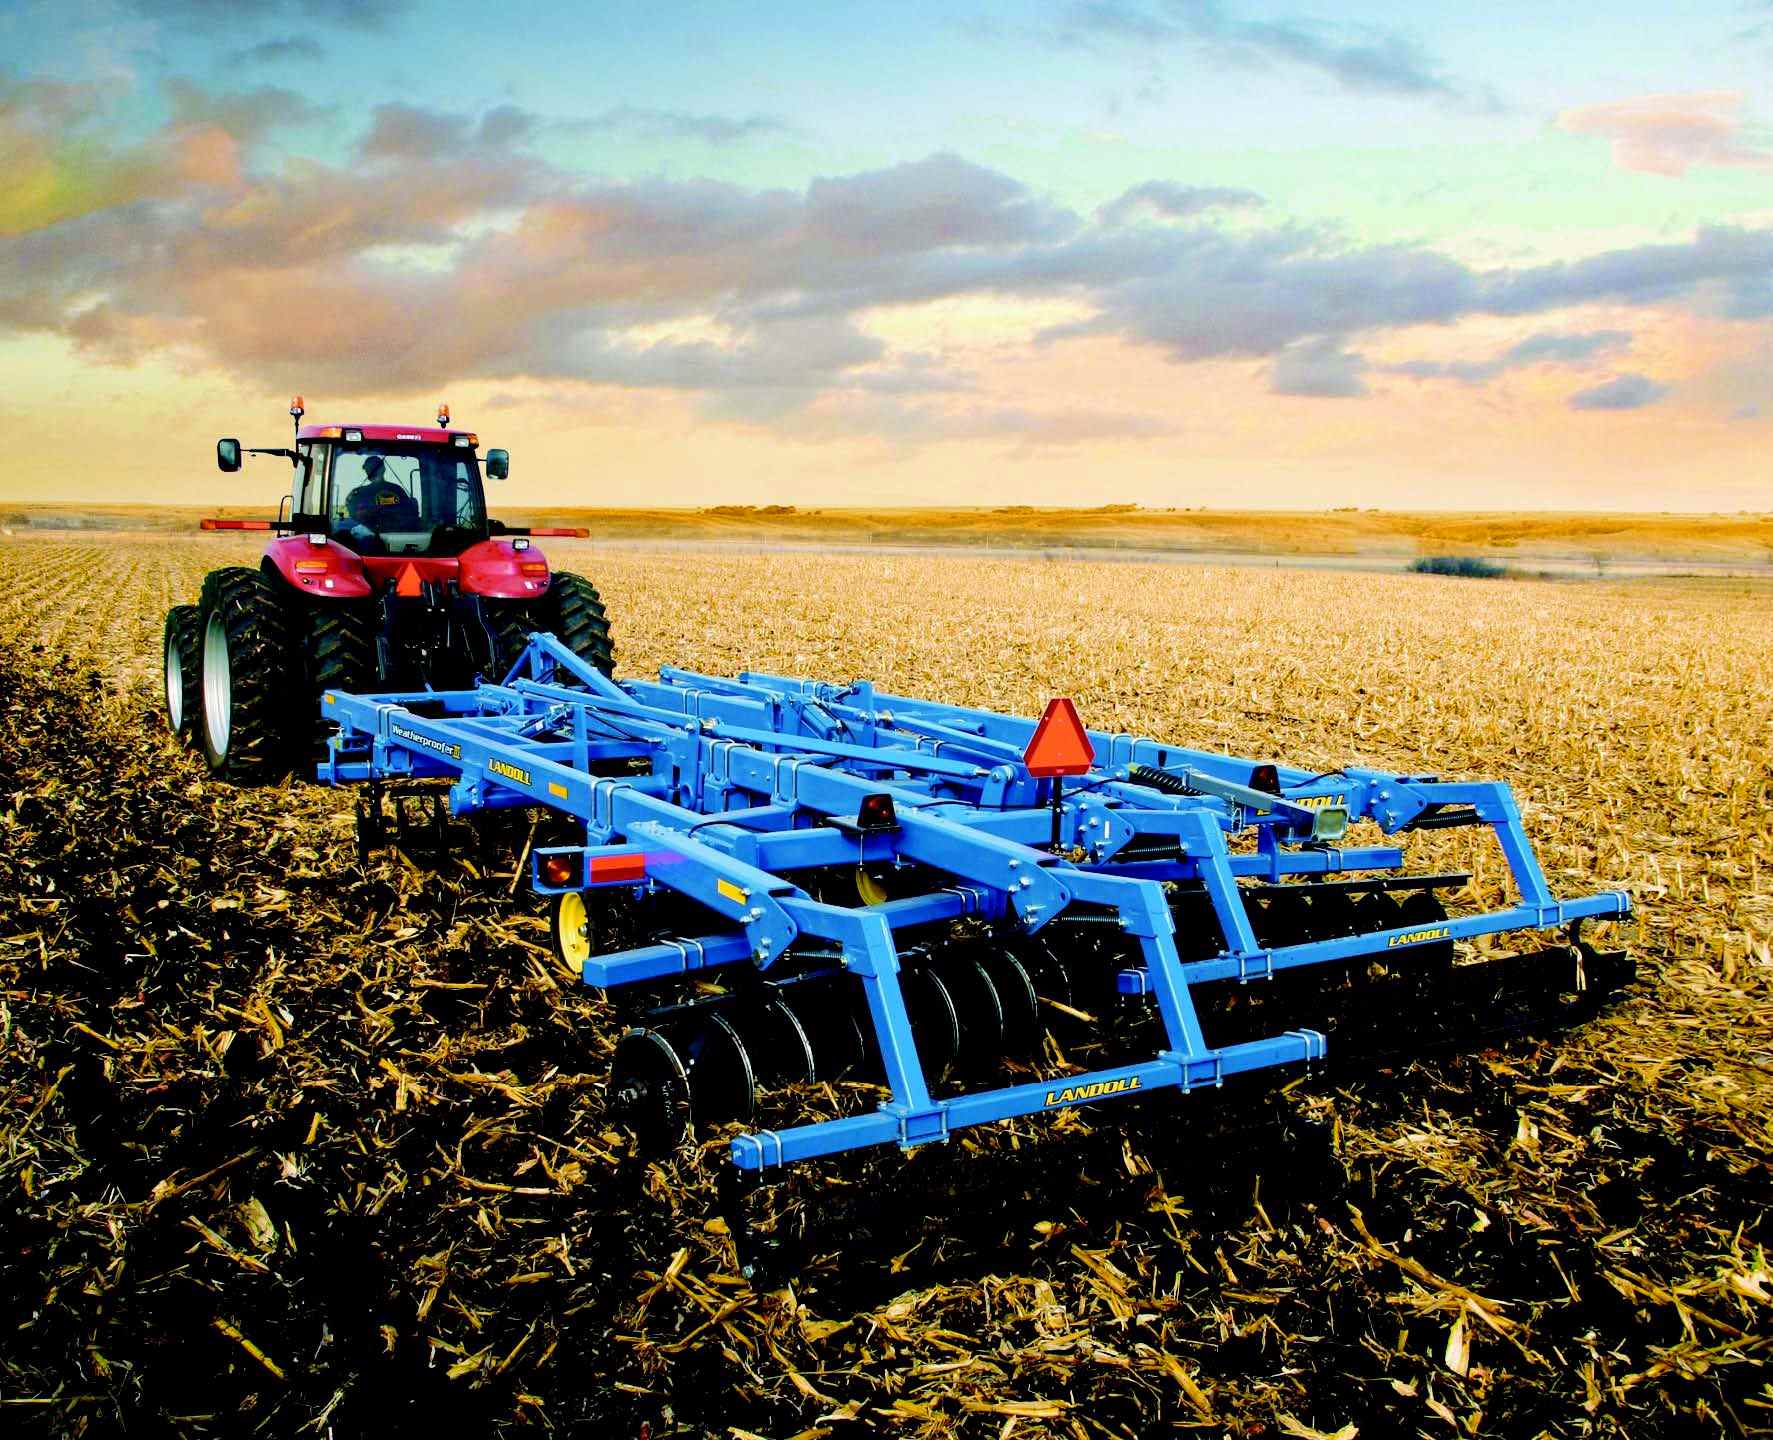 What Equipment Is Generally Used To Loosen And Prepare Soil For Planting?